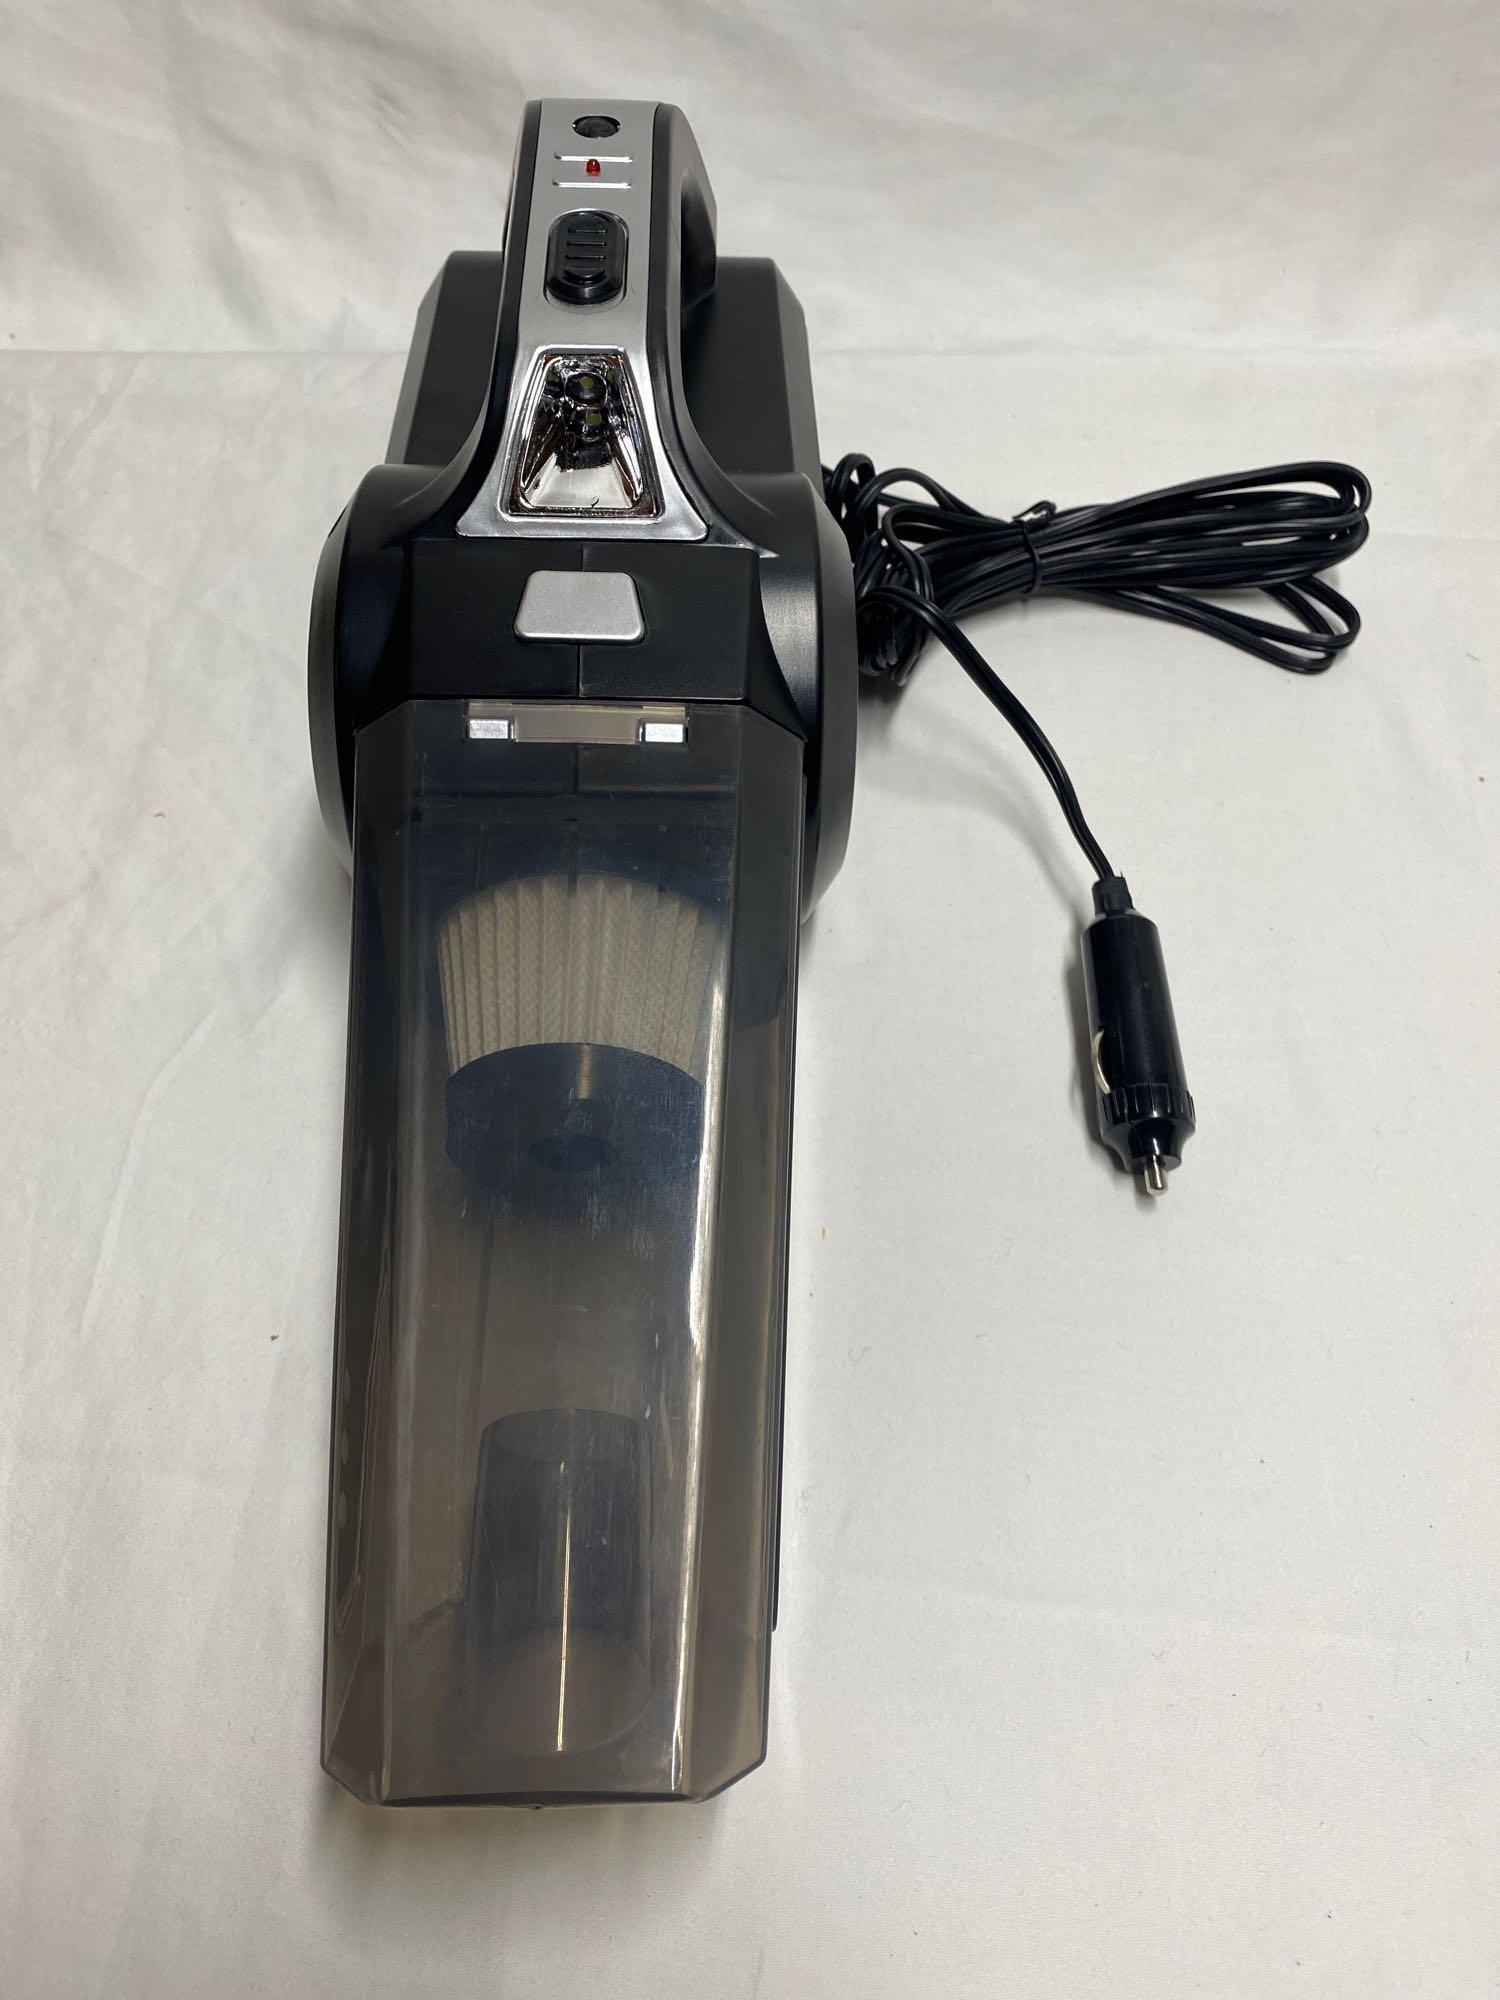 Car Mini Handheld Vacuum Cleaner with High Suction Power & Strong Inflation, $89.99 MSRP (BRAND NEW)